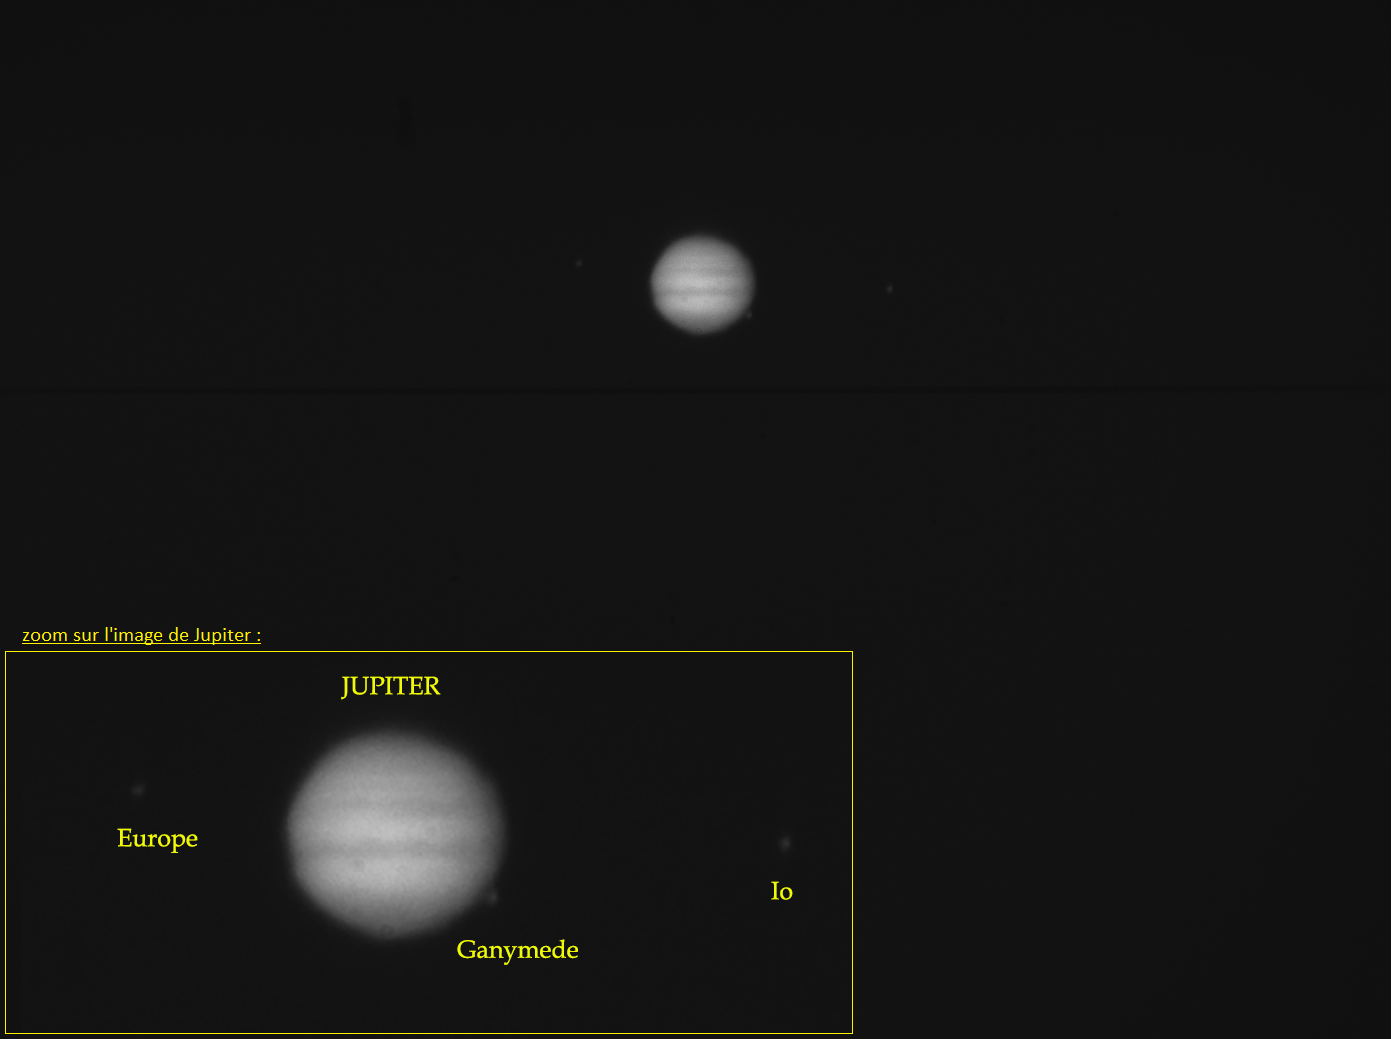 jupiter_lhires_photoshop_annote.png.b1dd0f239201bbfe1cee6d379ab6e0d7.png